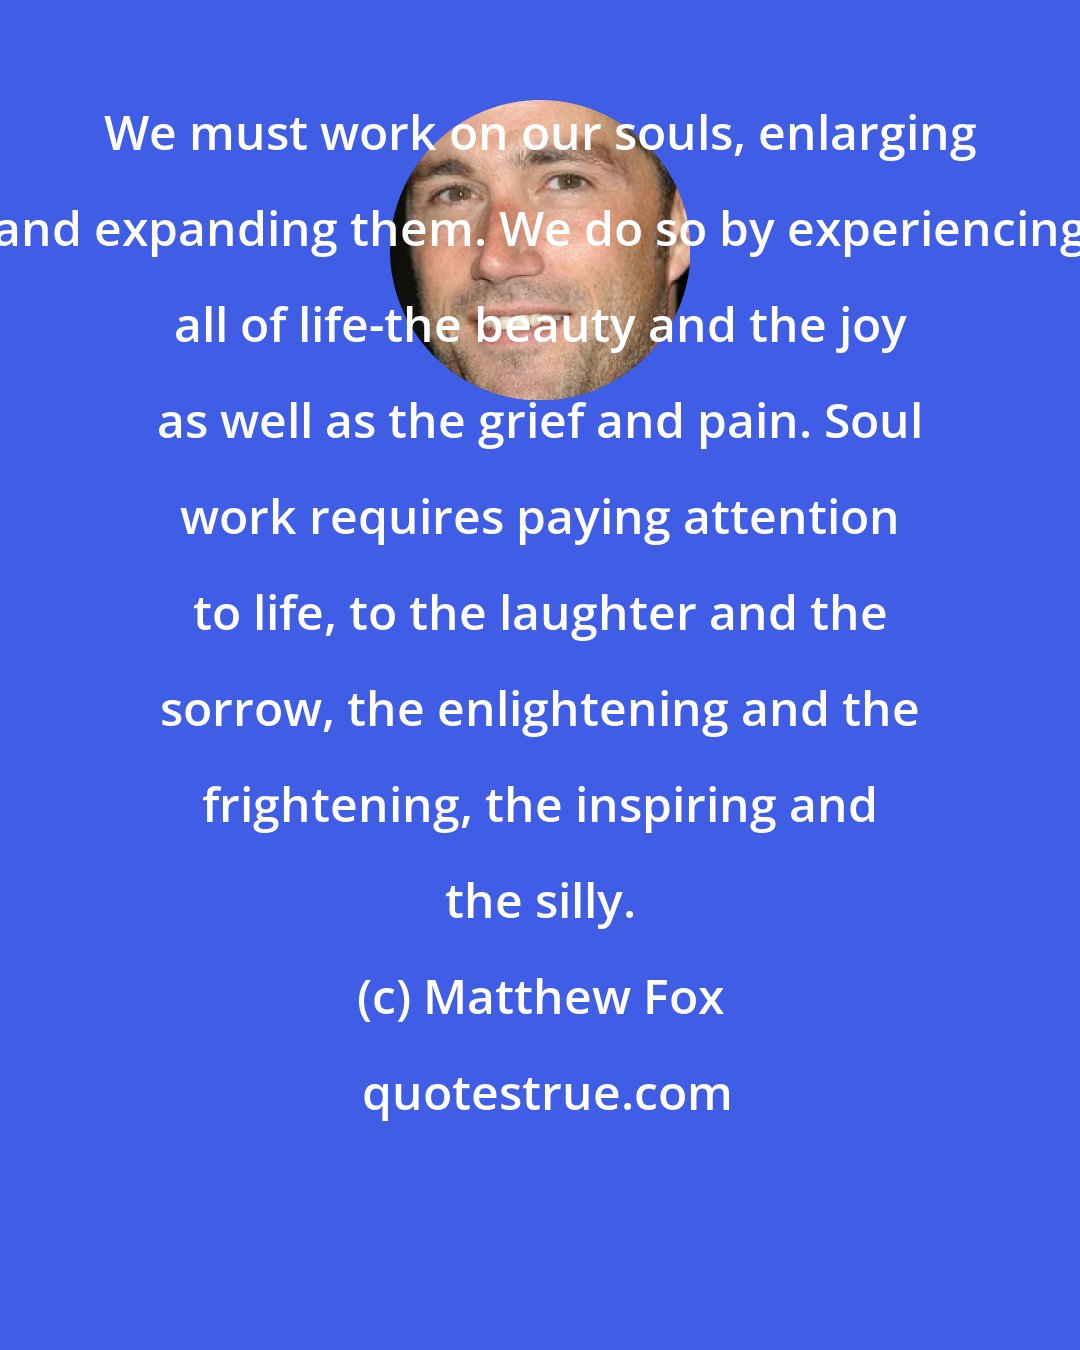 Matthew Fox: We must work on our souls, enlarging and expanding them. We do so by experiencing all of life-the beauty and the joy as well as the grief and pain. Soul work requires paying attention to life, to the laughter and the sorrow, the enlightening and the frightening, the inspiring and the silly.